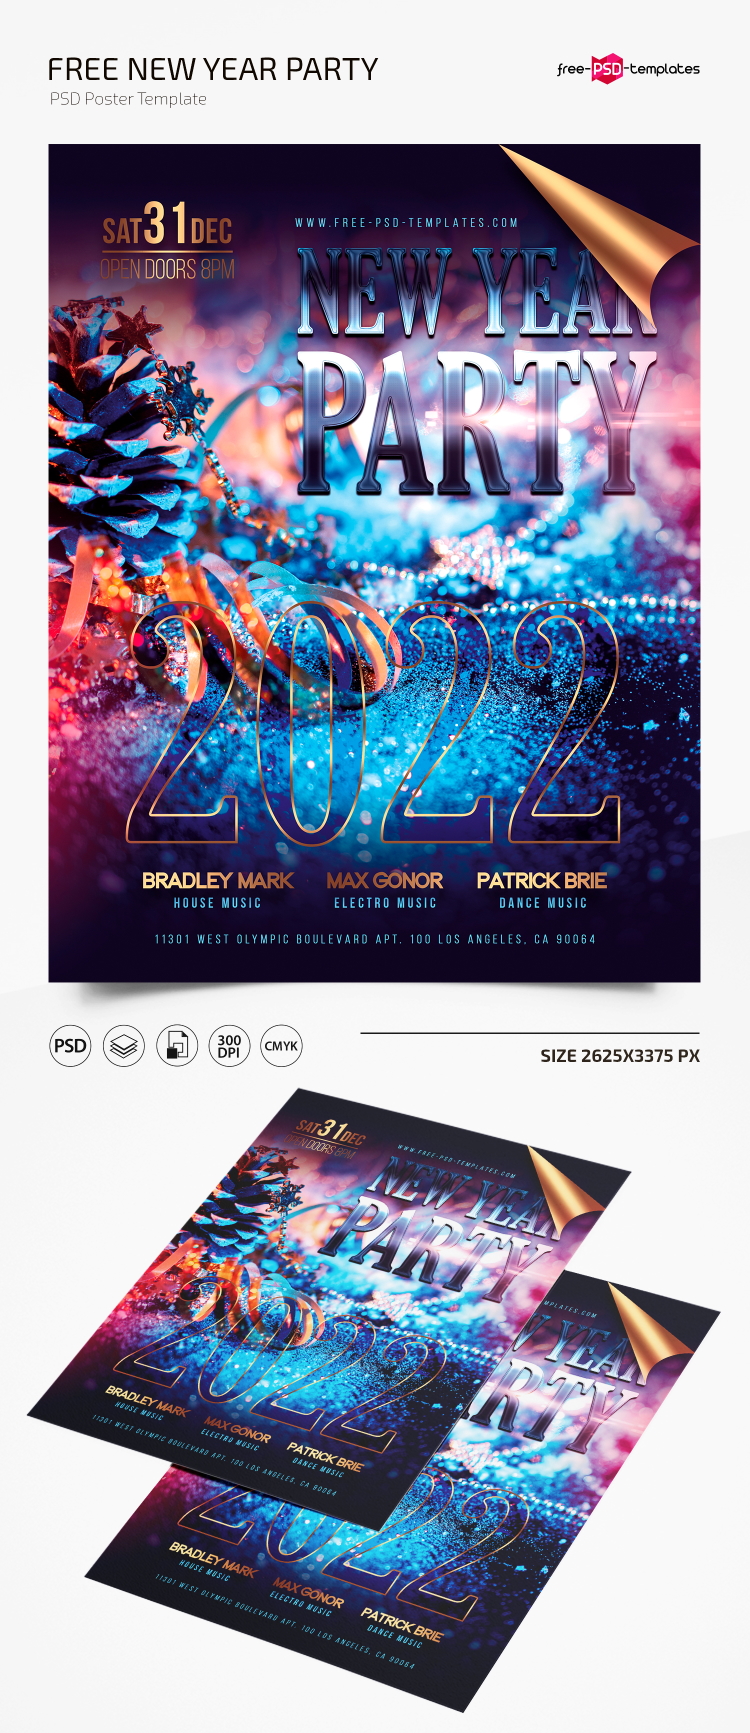 Free New Year Party Poster PSD Template